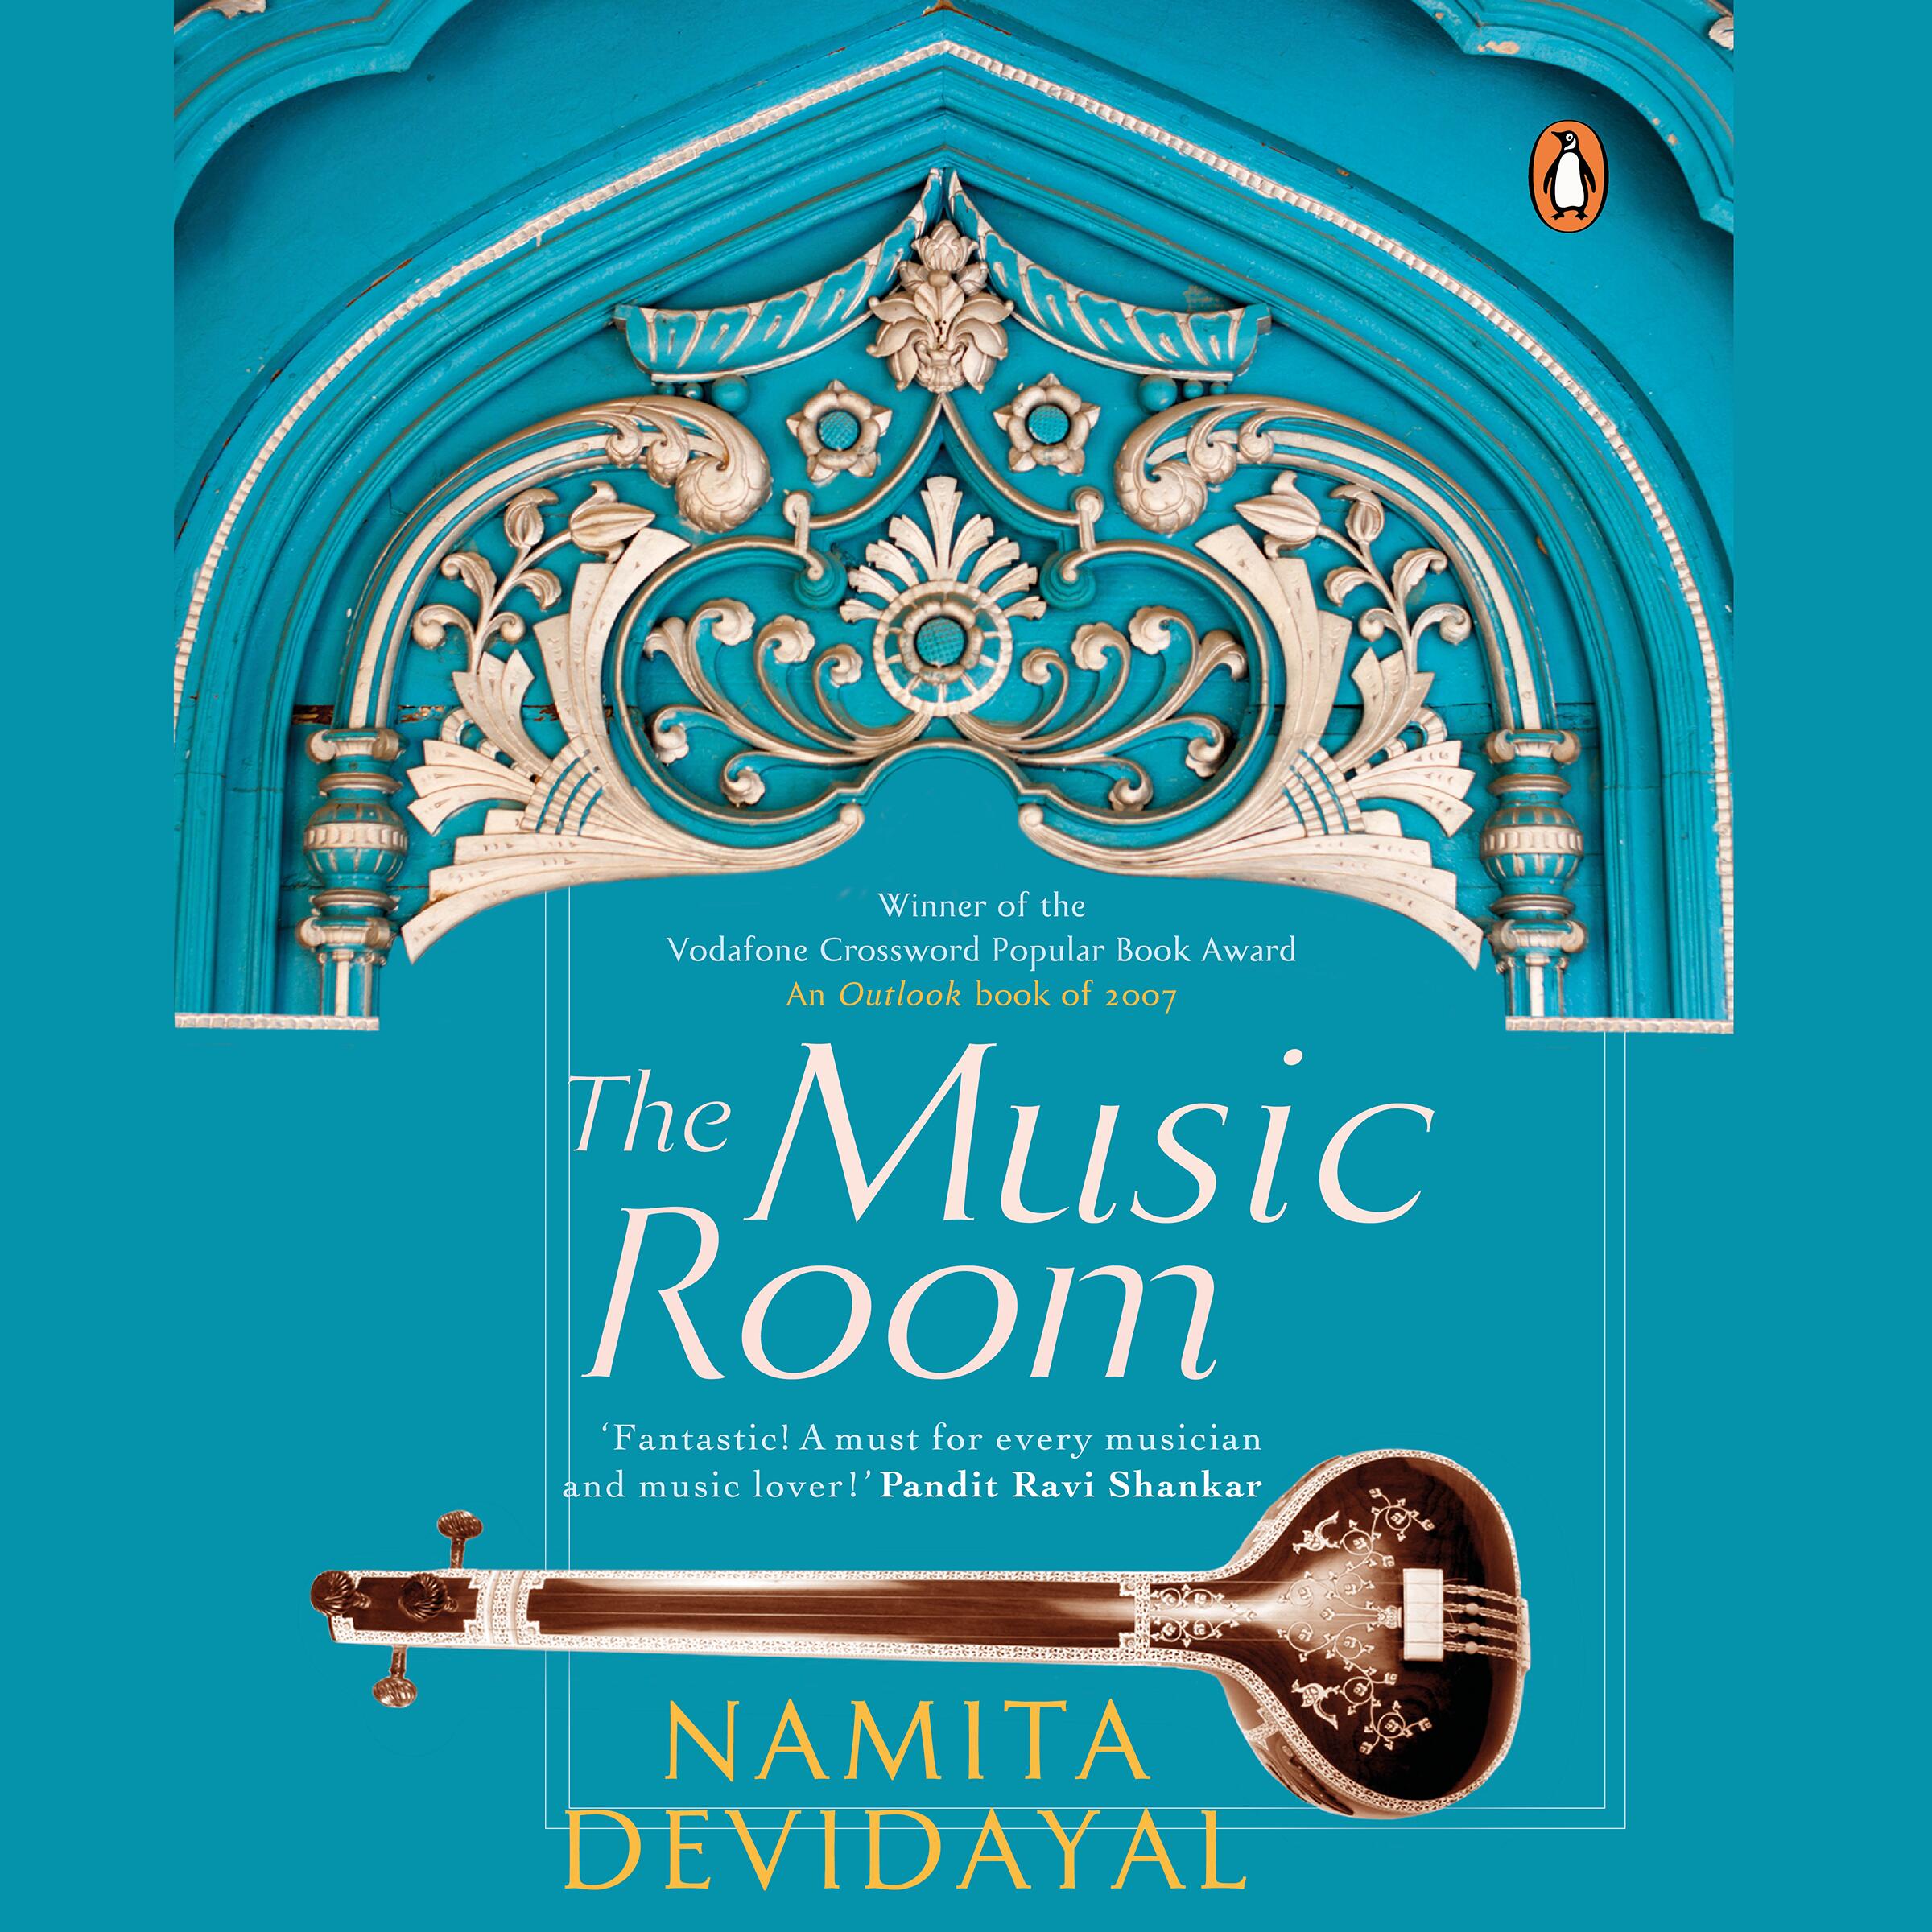 book review the music room by william fiennes